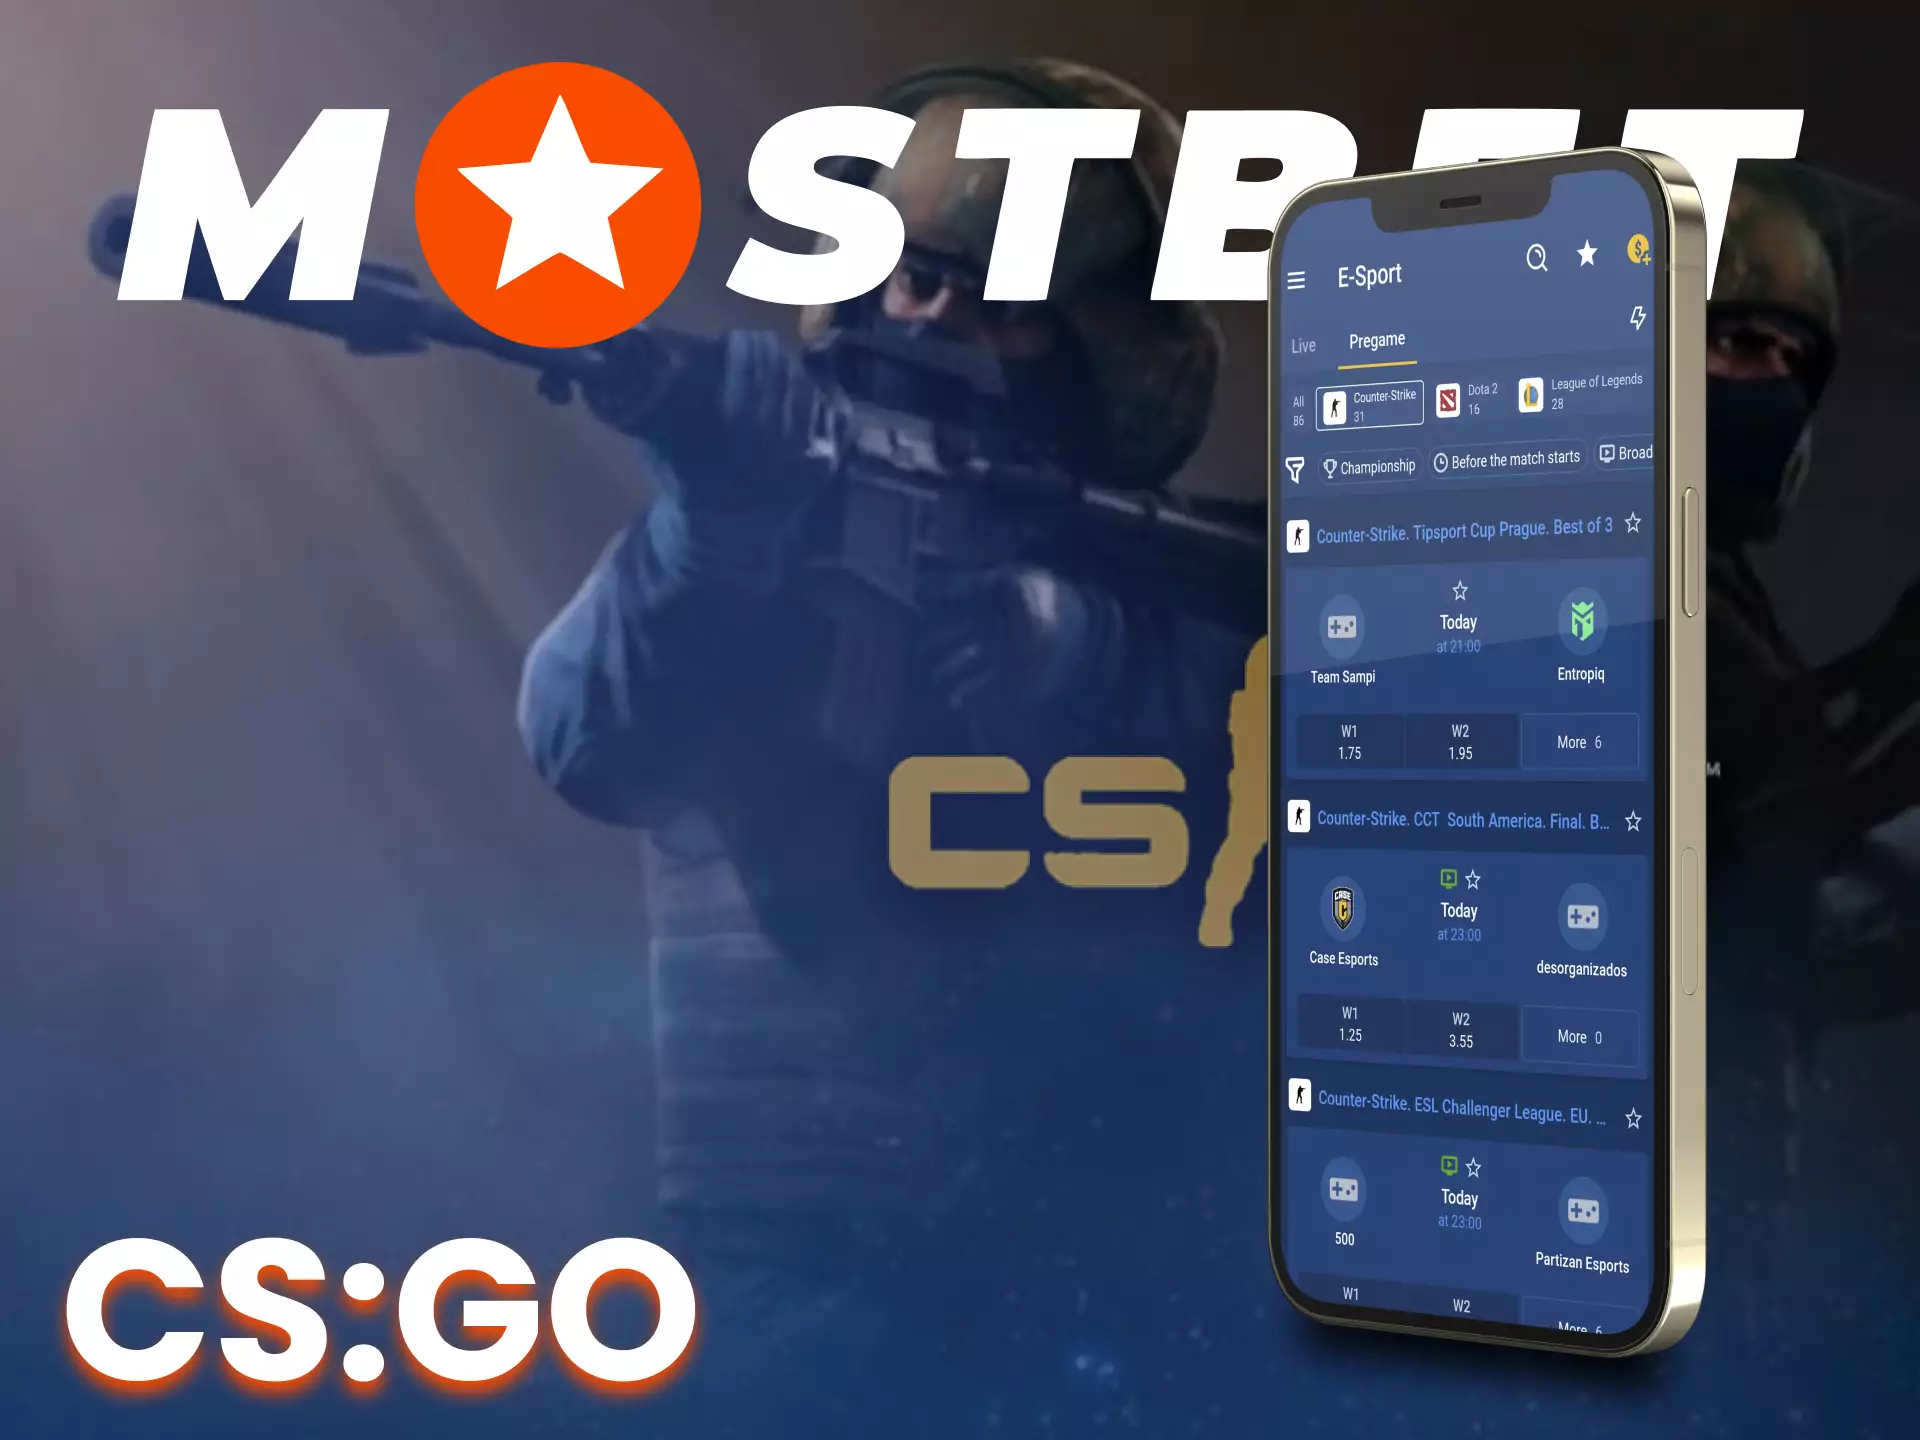 Place your bets on CS:GO on the Mostbet app.